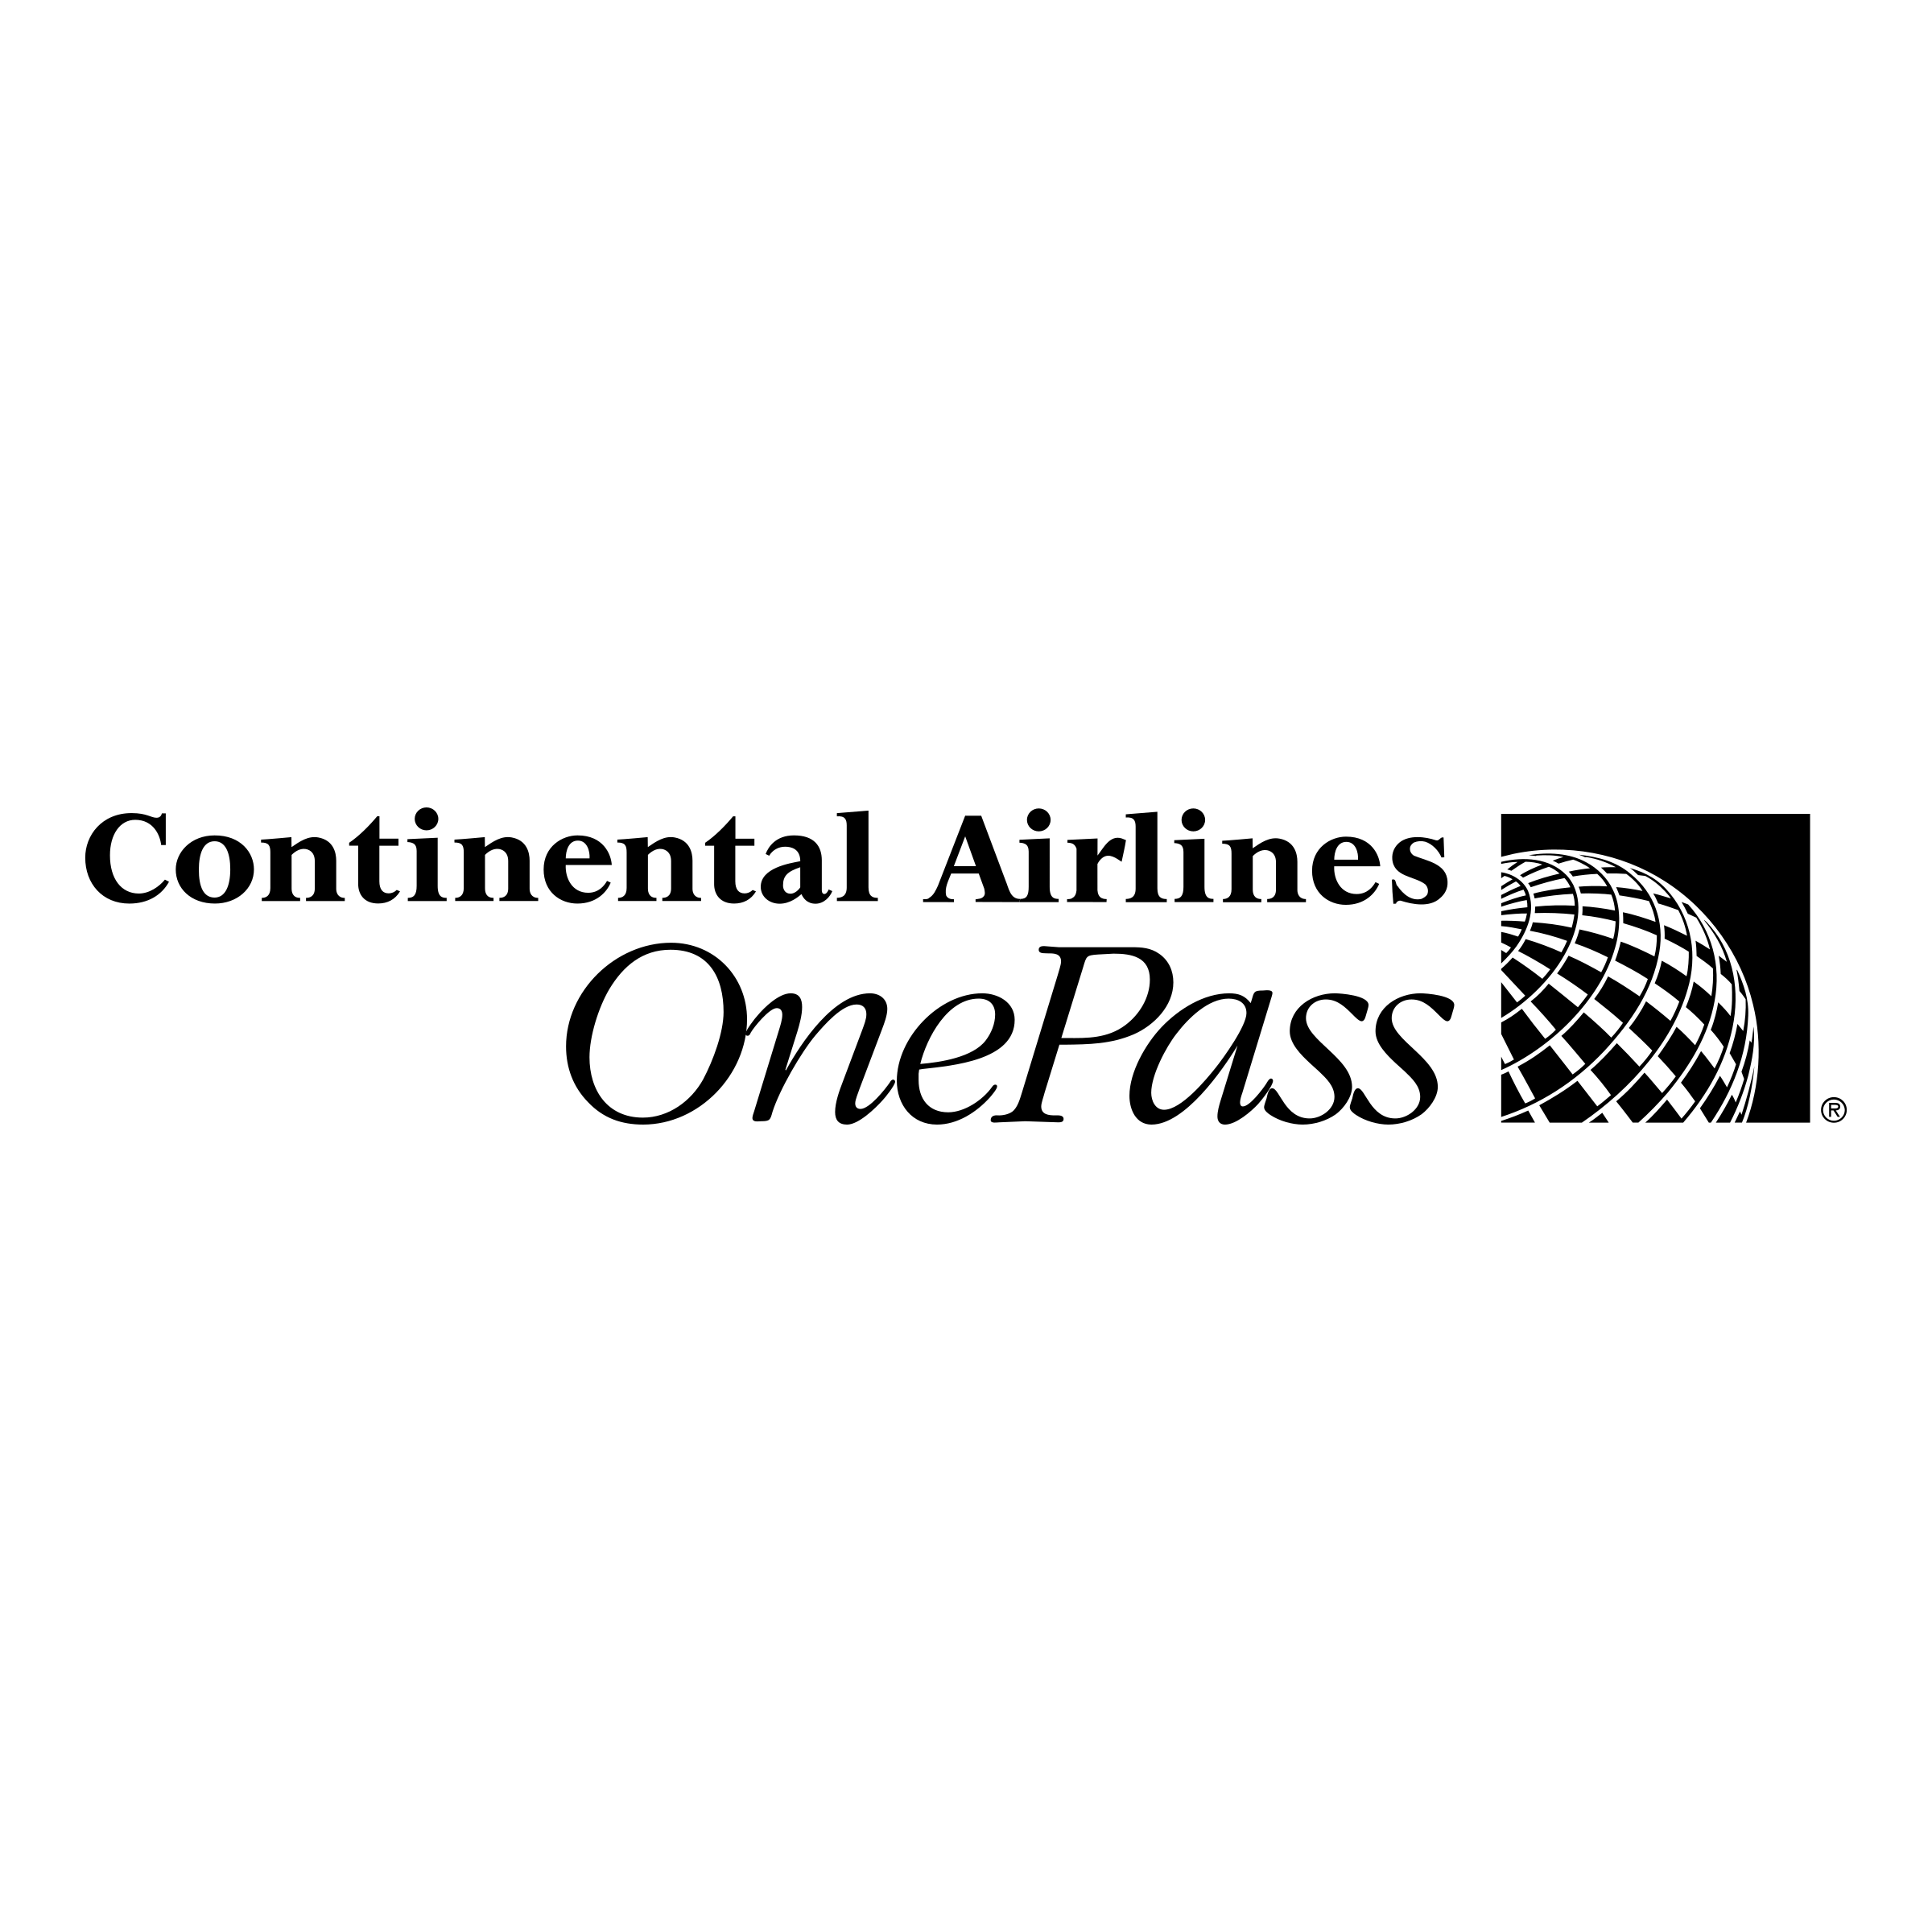 Continental Black Logo - Continental Airlines OnePass Logo PNG Transparent & SVG Vector ...